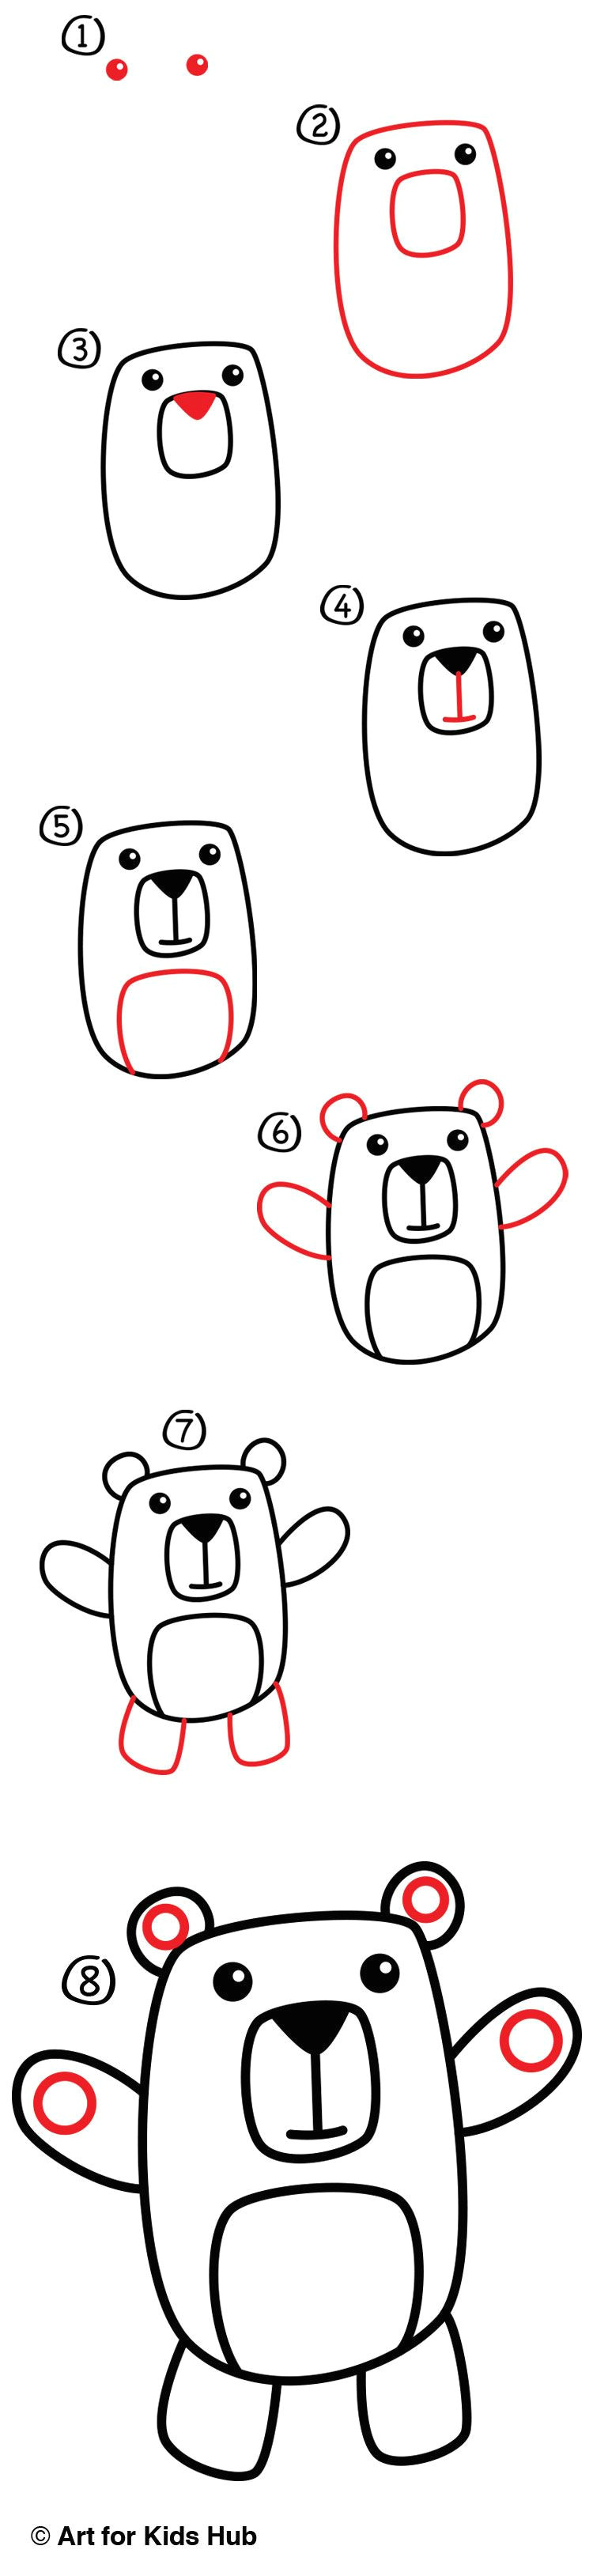 Cute Drawing for Your Teacher How to Draw A Cartoon Bear for Young Artists Art for Kids Hub